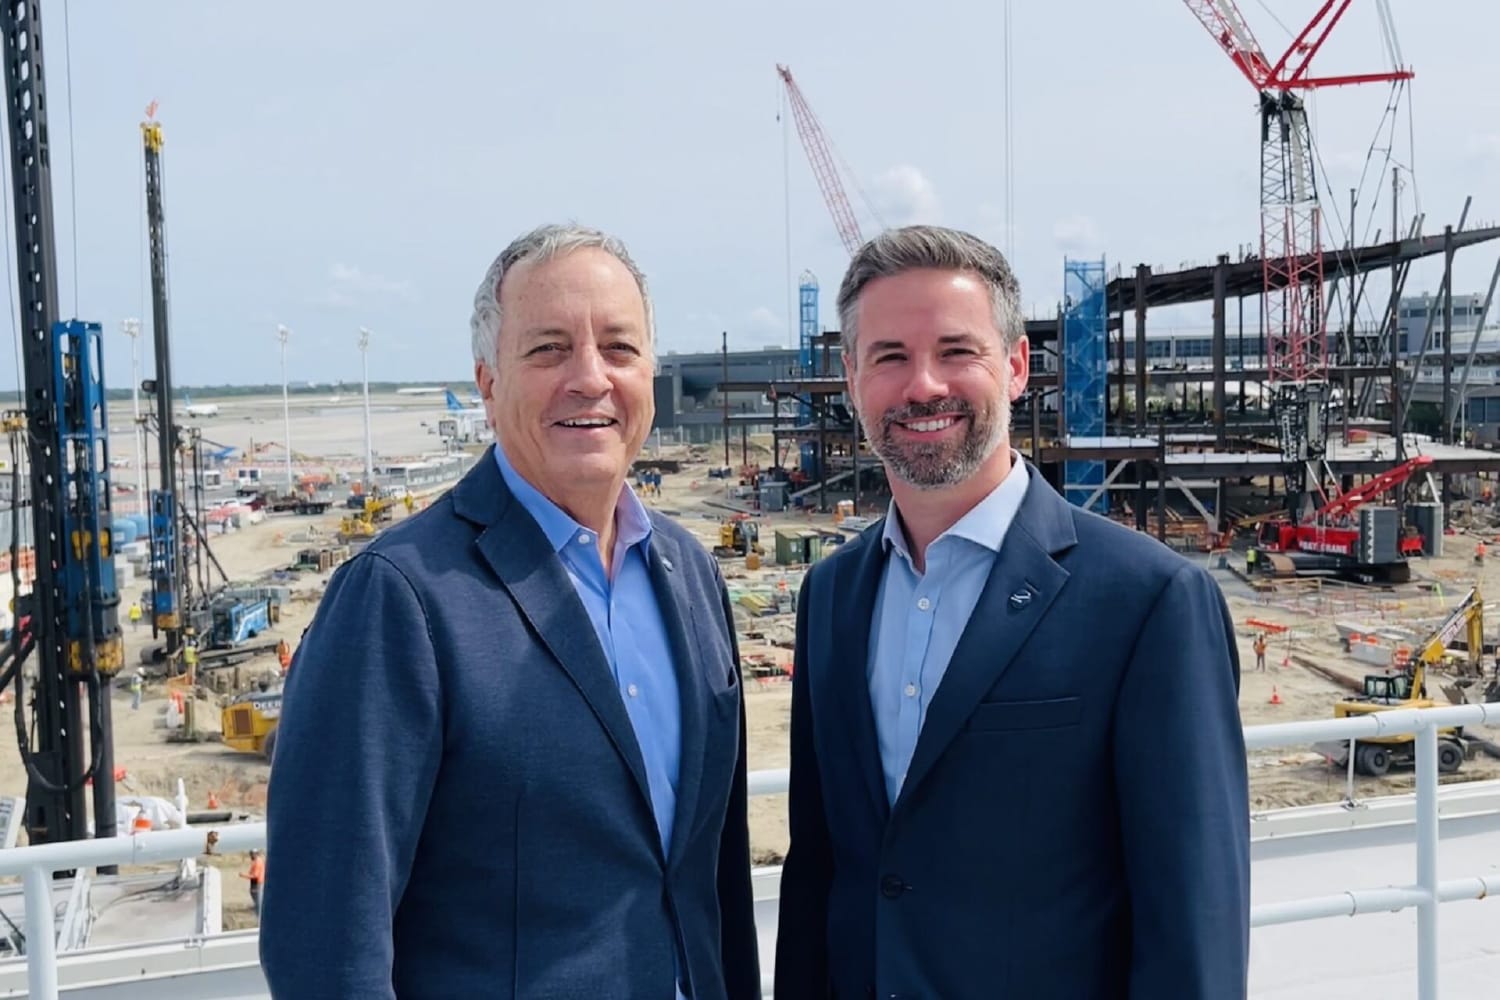 Vantage Airport Group CEO George Casey with JMP COO Steve Thody overlooking the Terminal 6 construction site. 